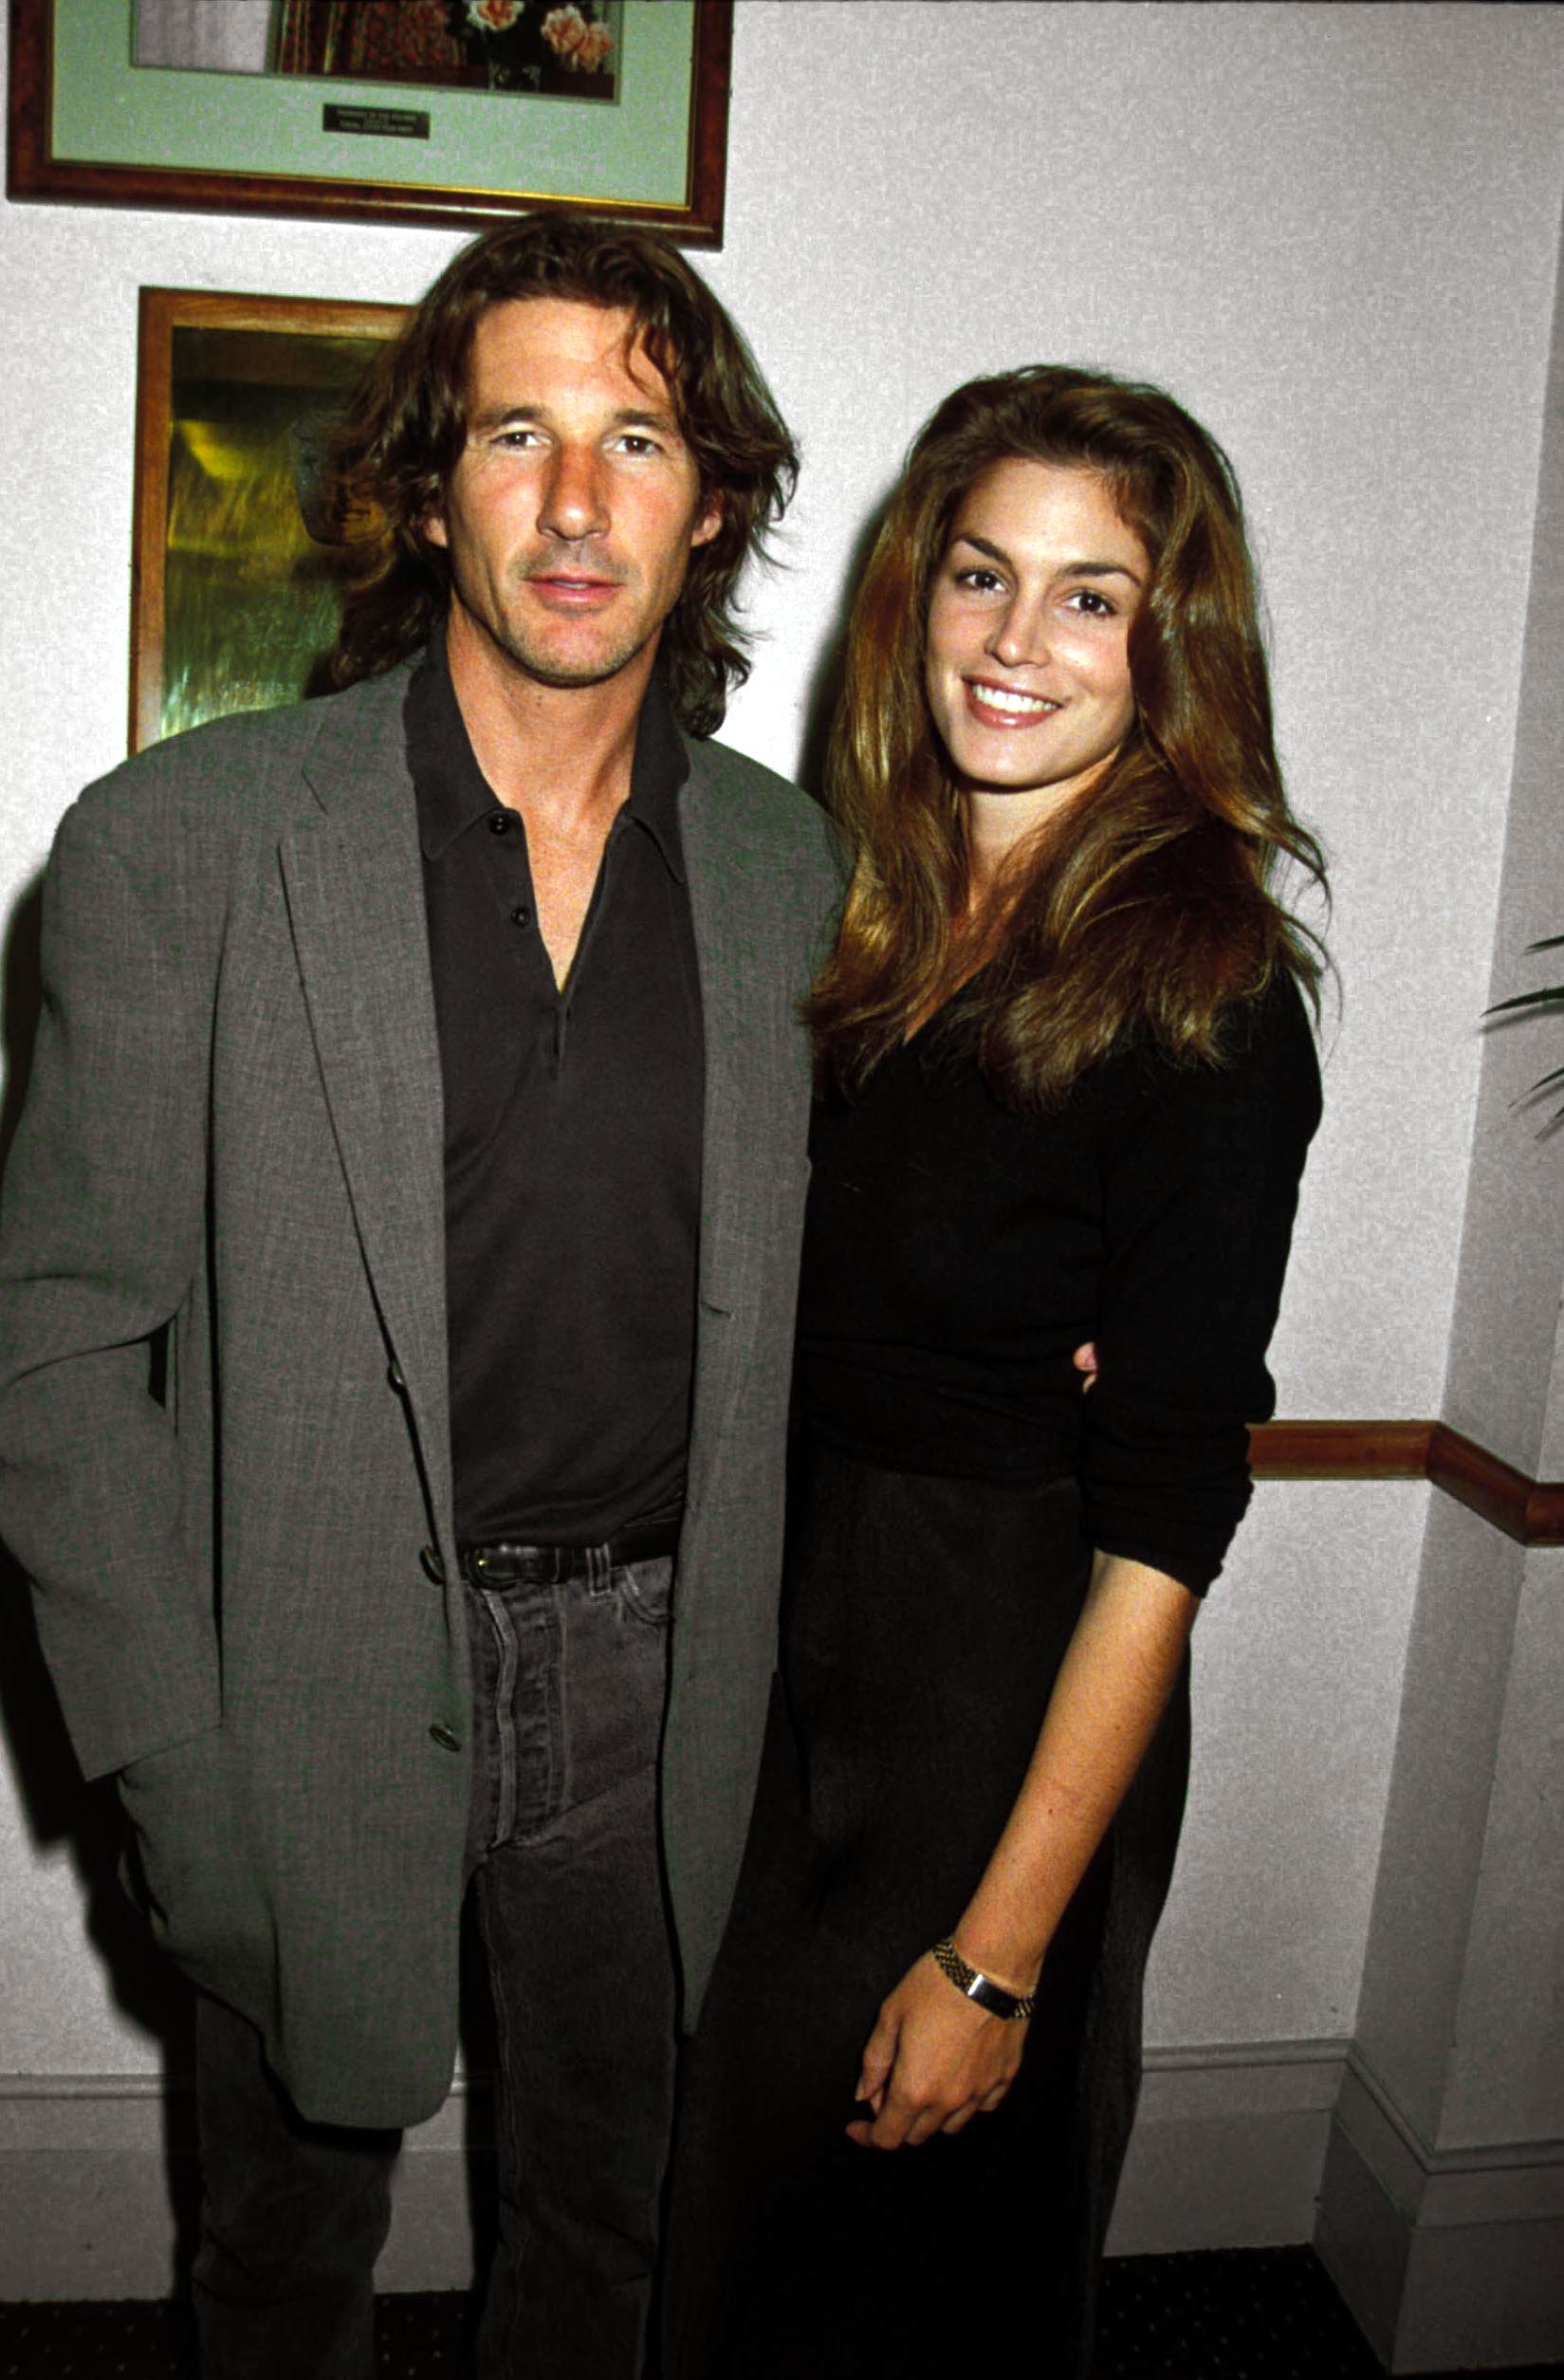  Cindy Crawford And Richard Gere Ant Mr Jones Premiere, Circa 1991 | Photo: GettyImages